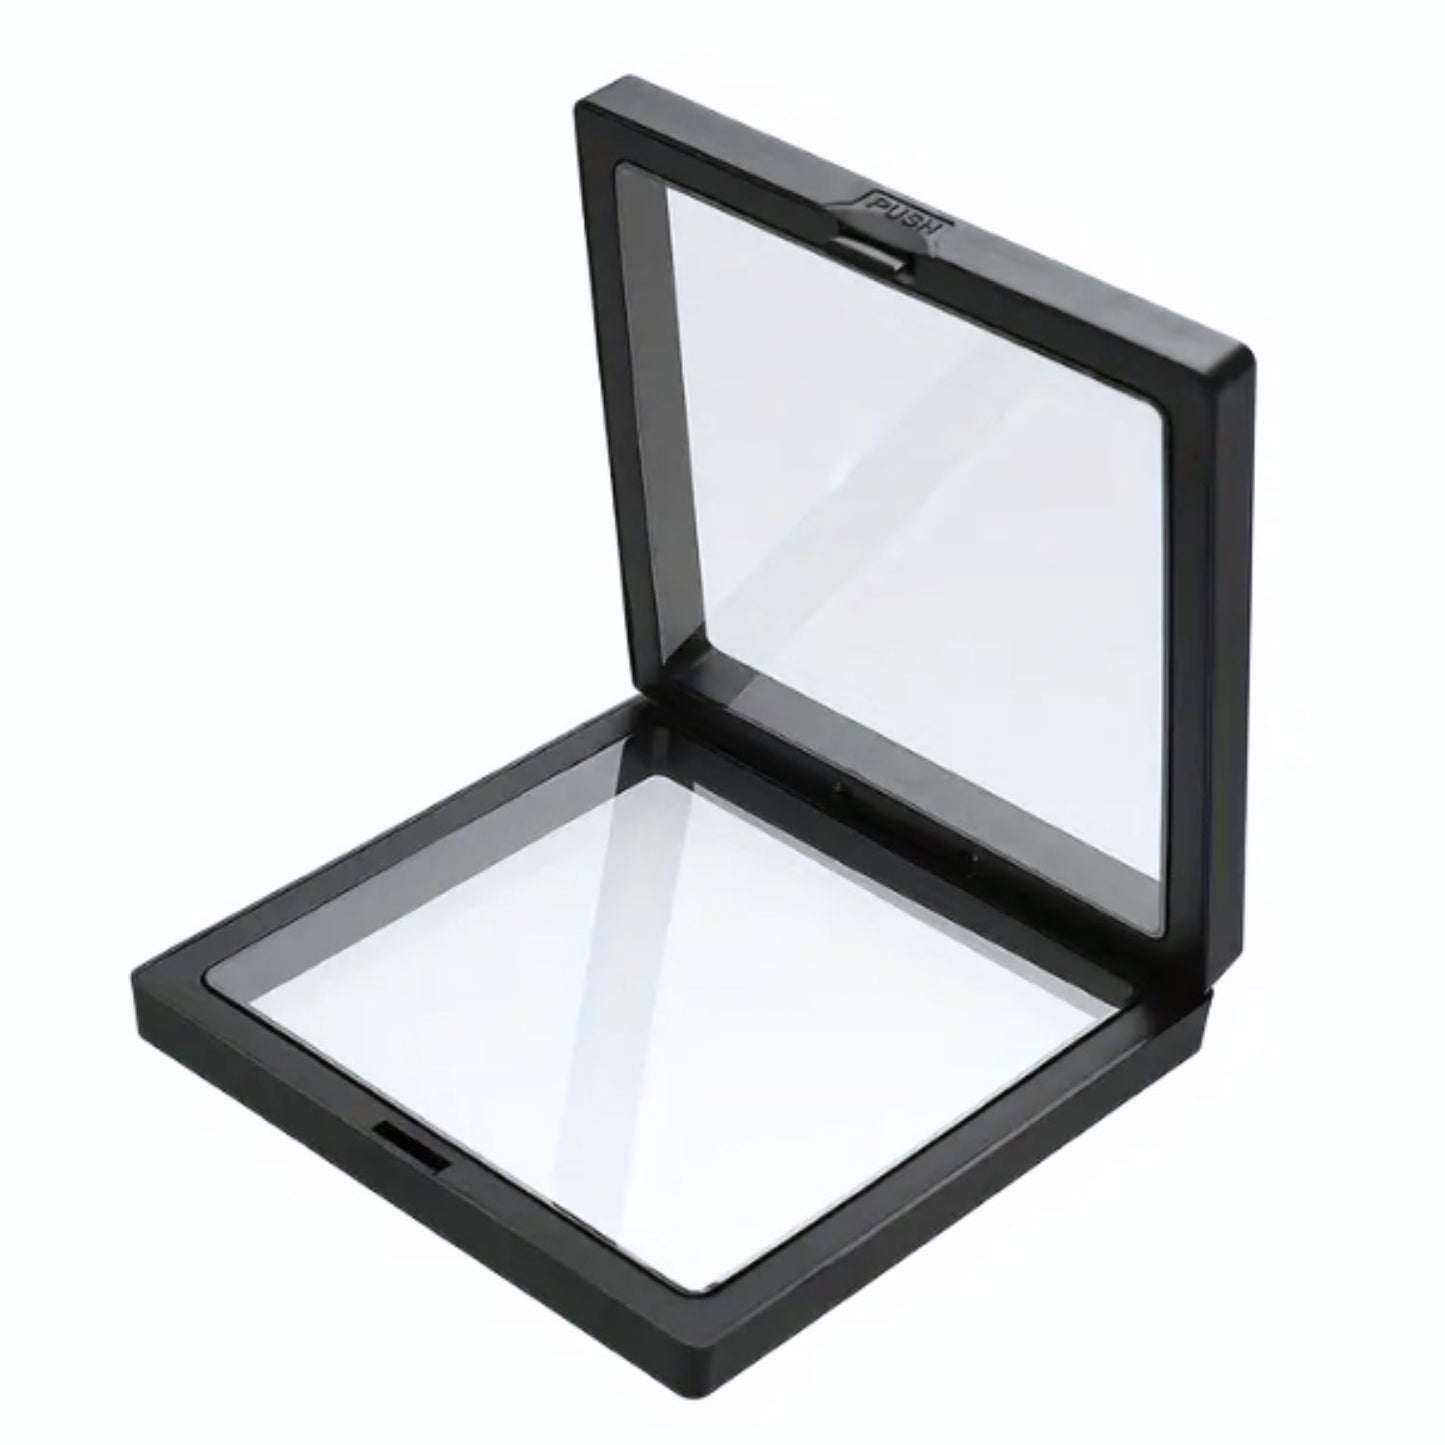 Display Cases with Clear Membrane Film